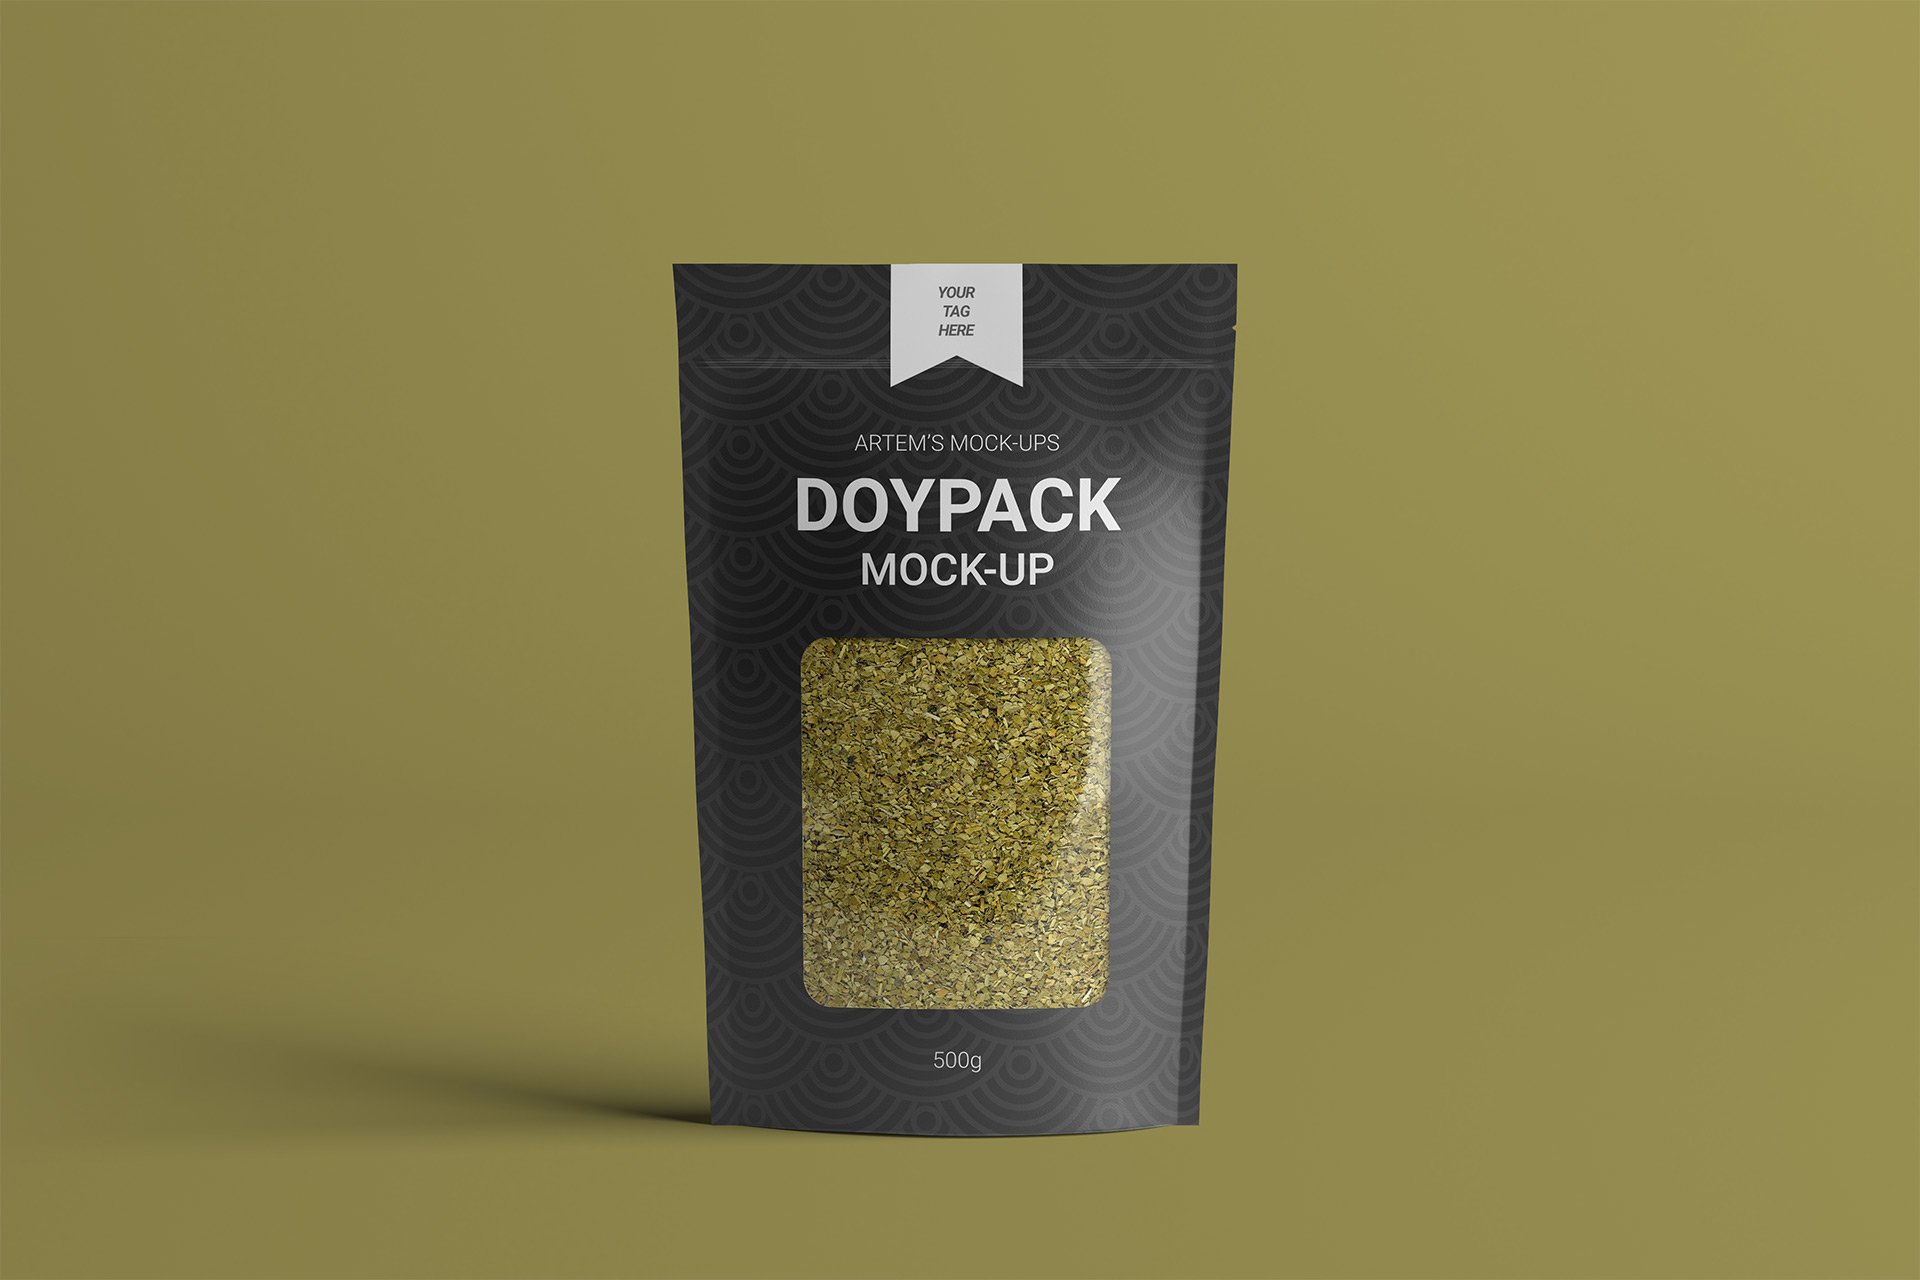 Classic black paper package for matcha.